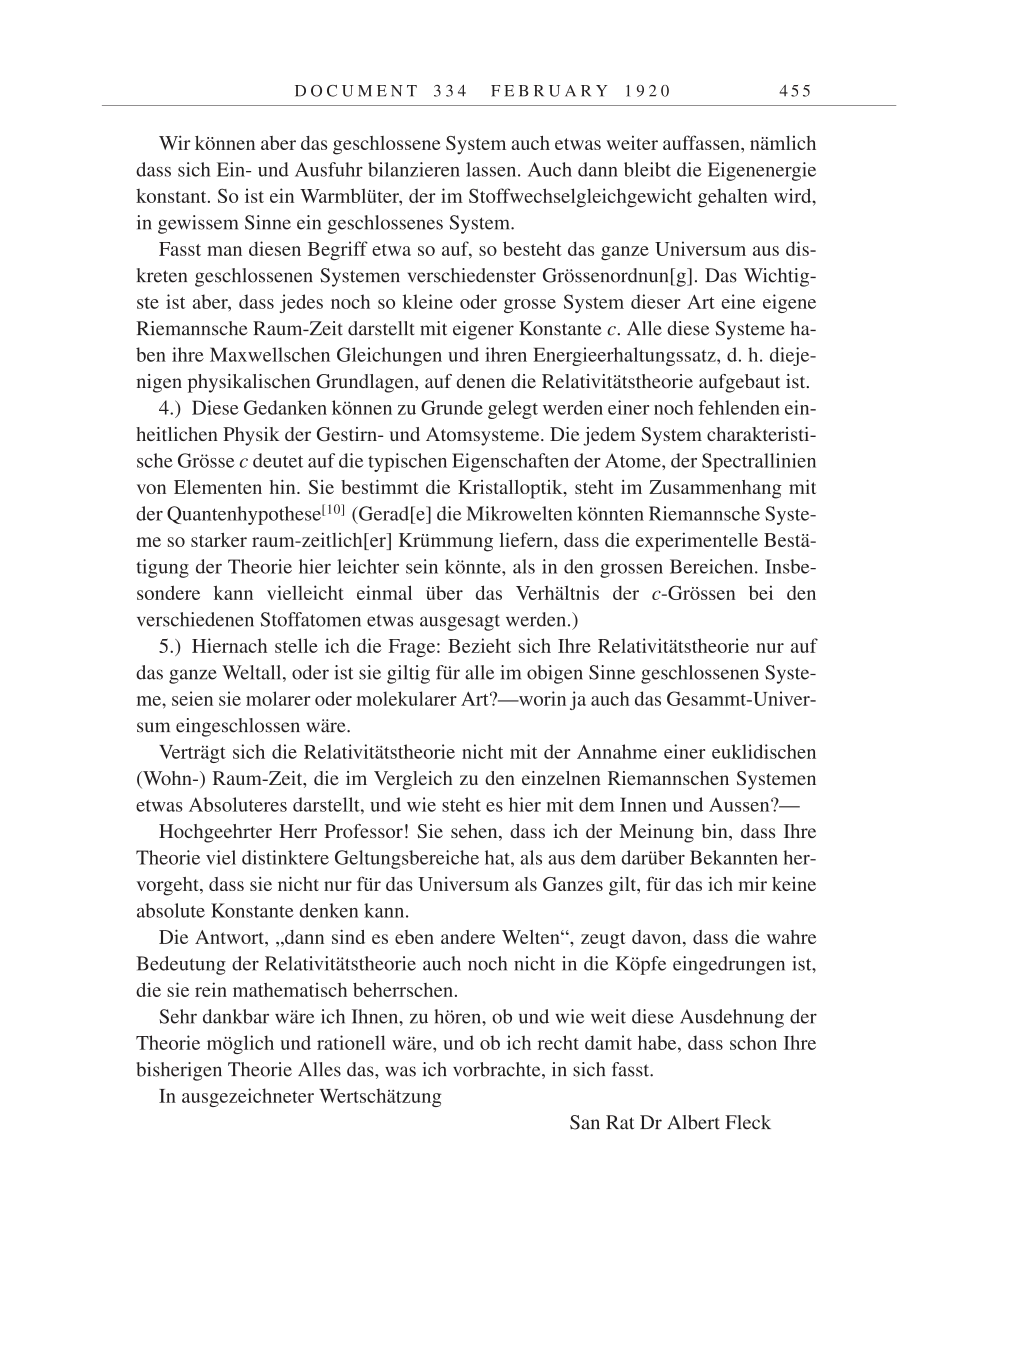 Volume 9: The Berlin Years: Correspondence January 1919-April 1920 page 455